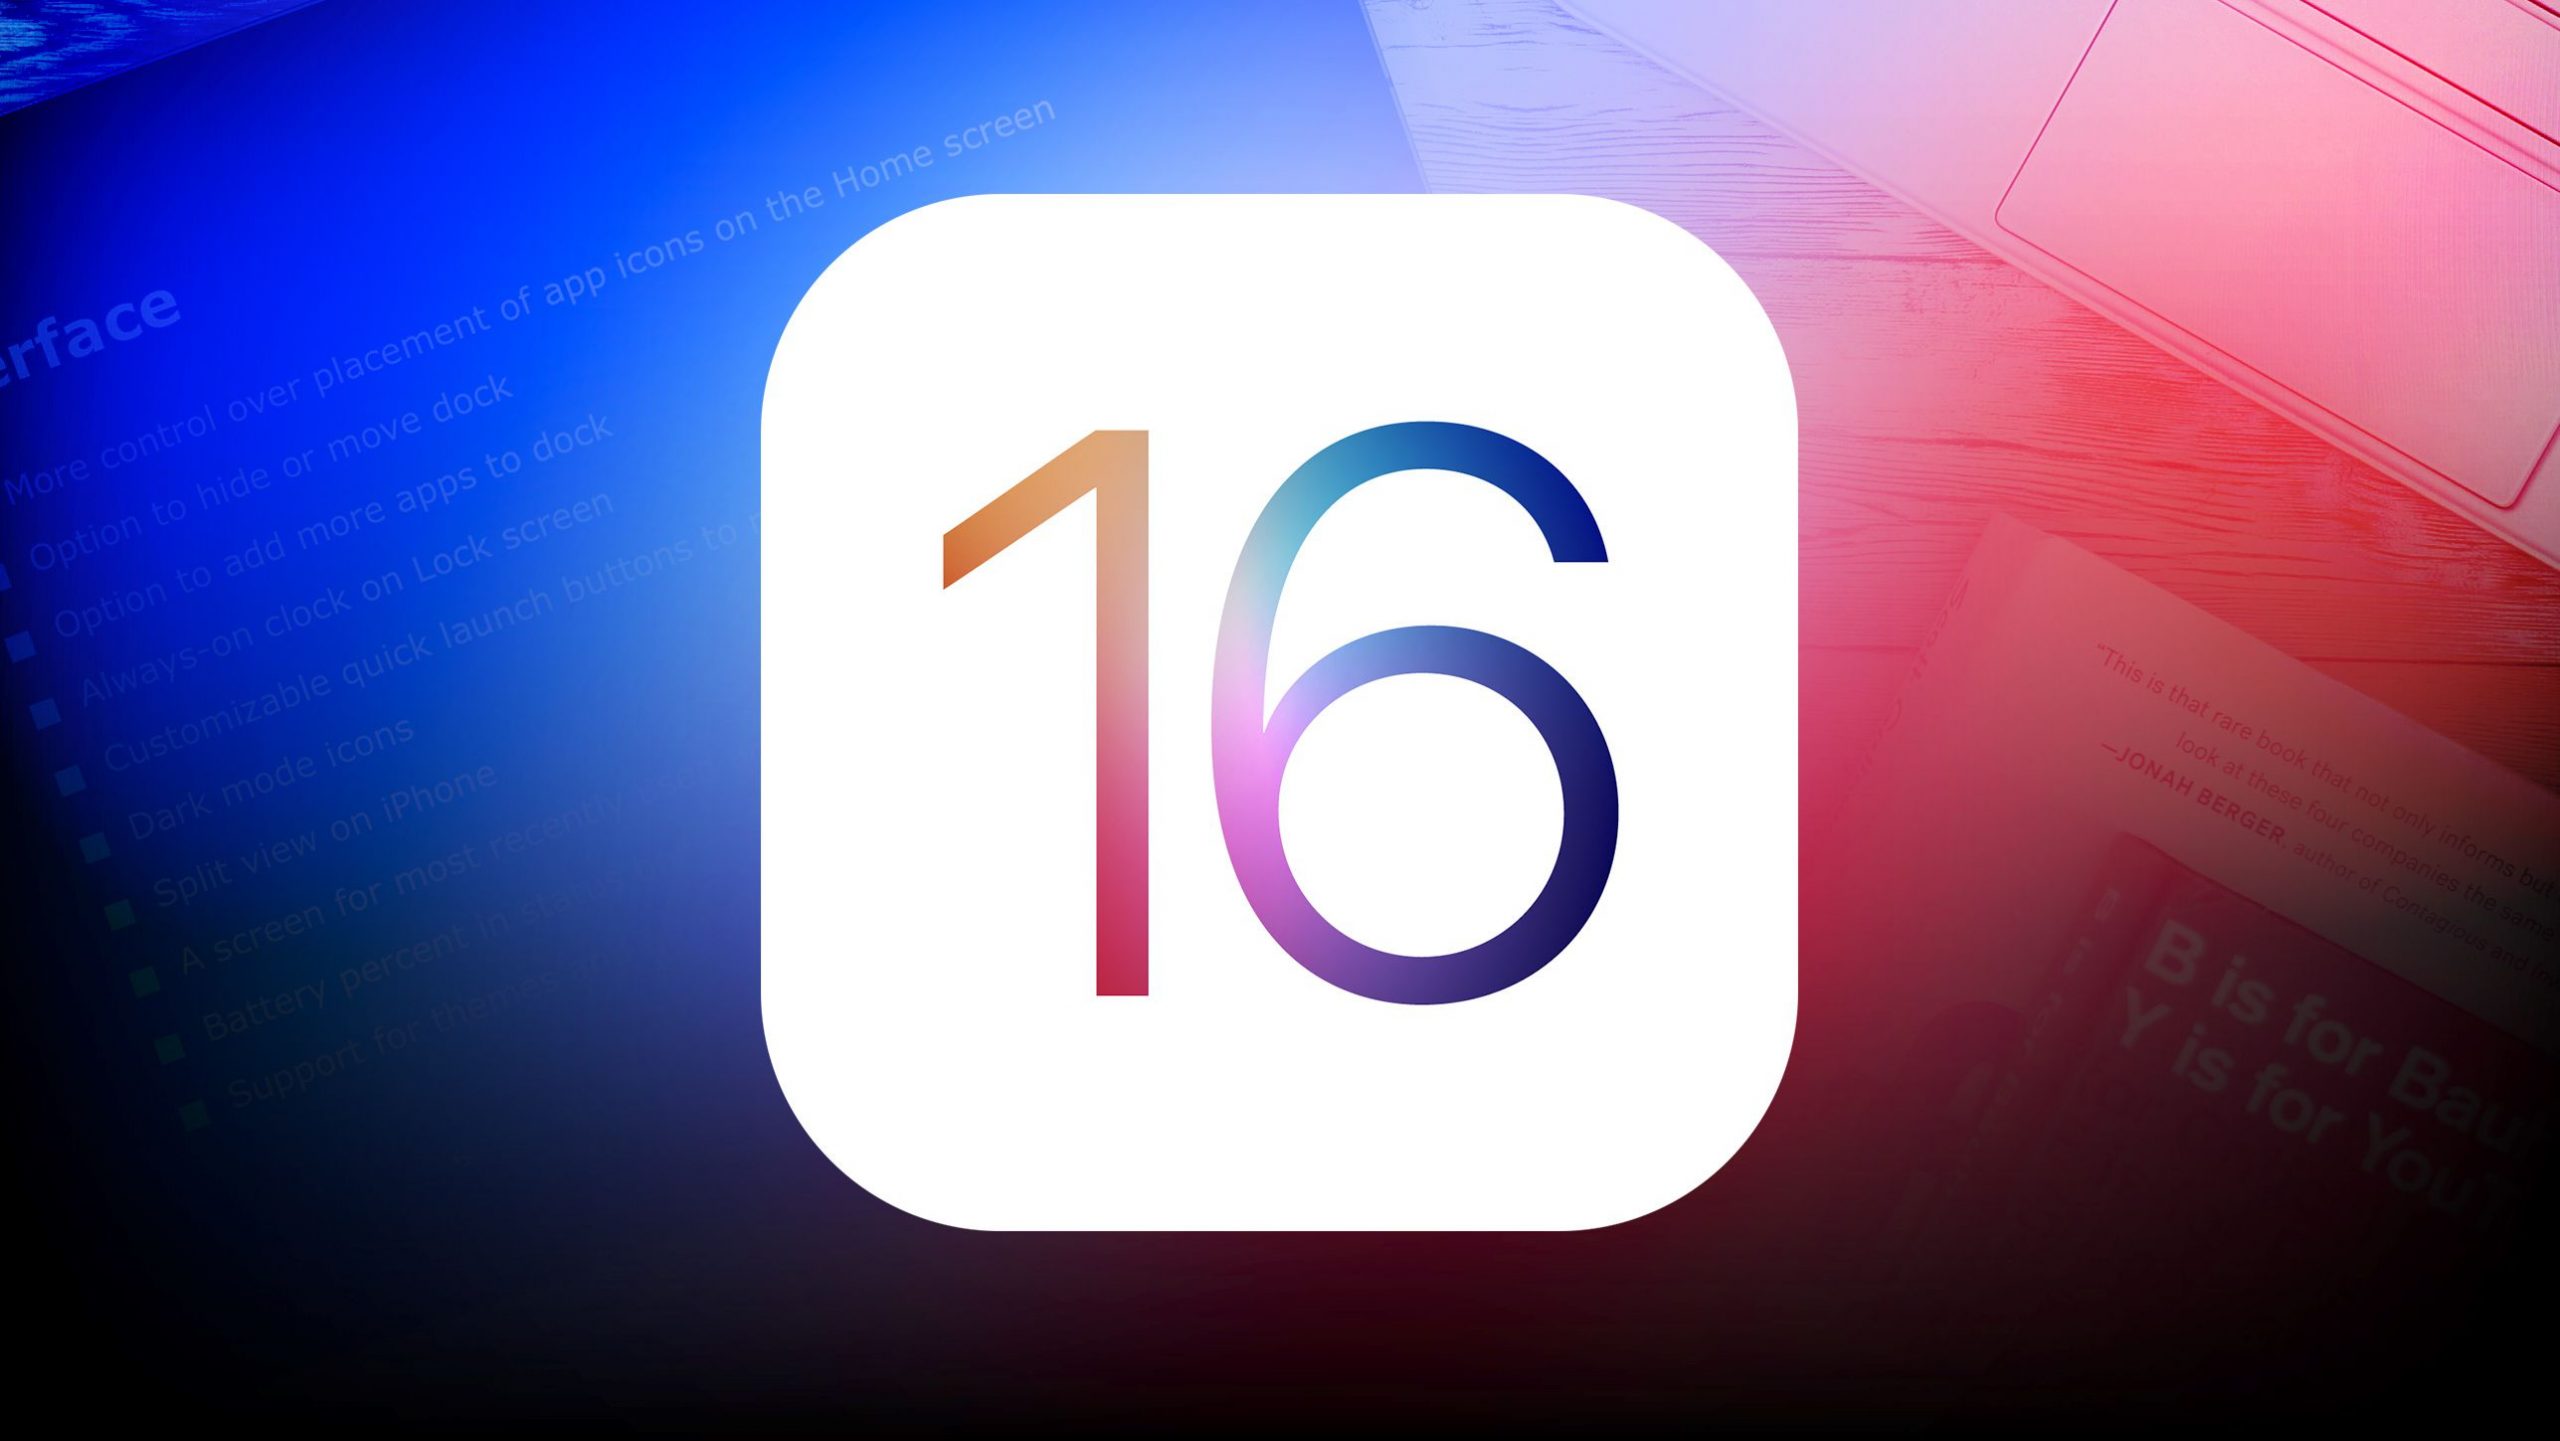 iOS 16 Wishlist: Features MacRumors readers want to see in the next version of iOS

